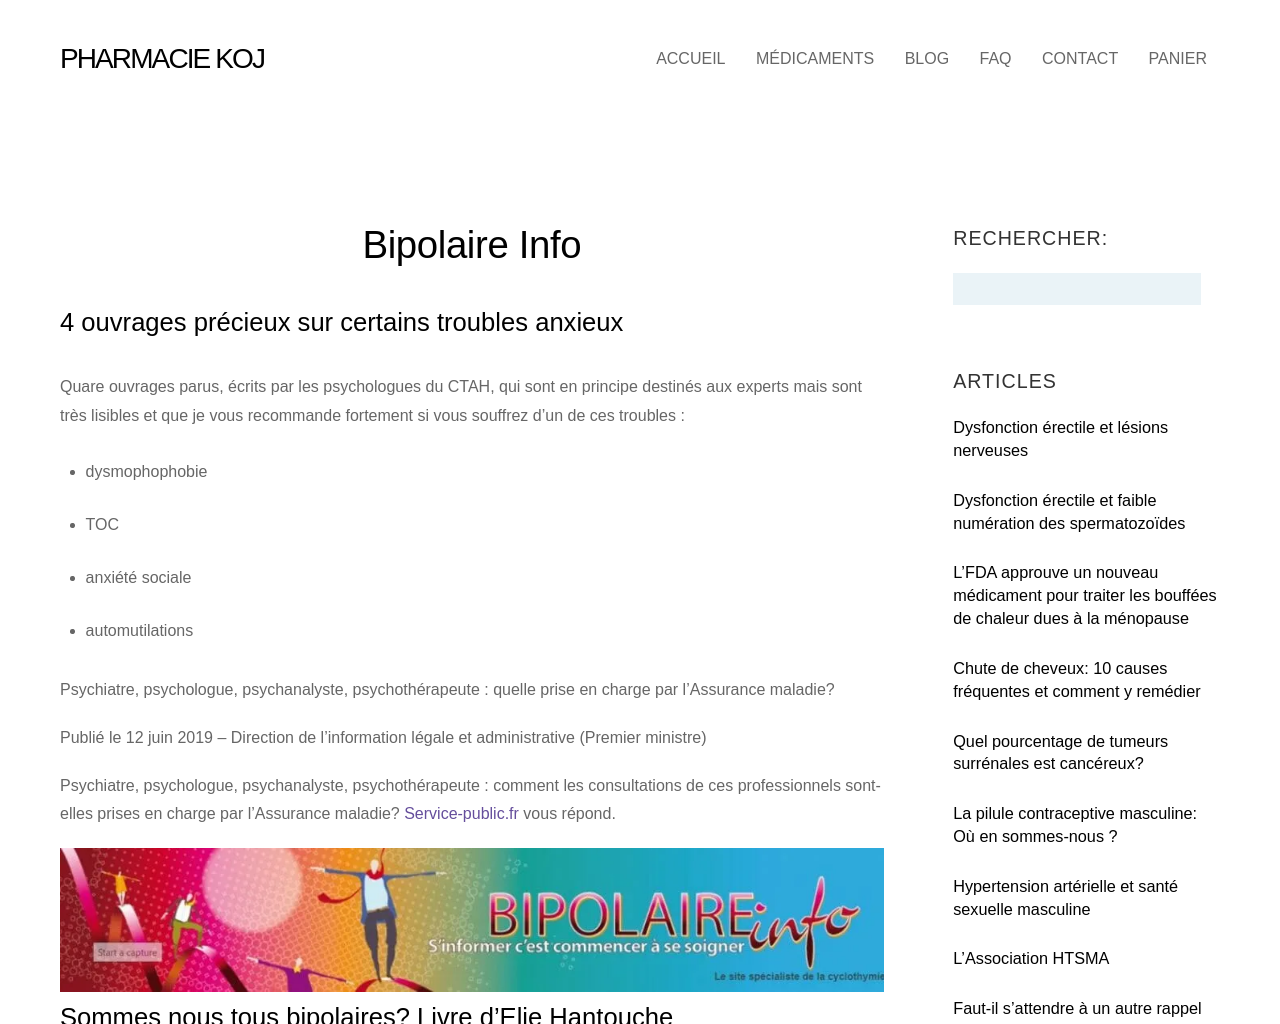 www.bipolaire-info.org